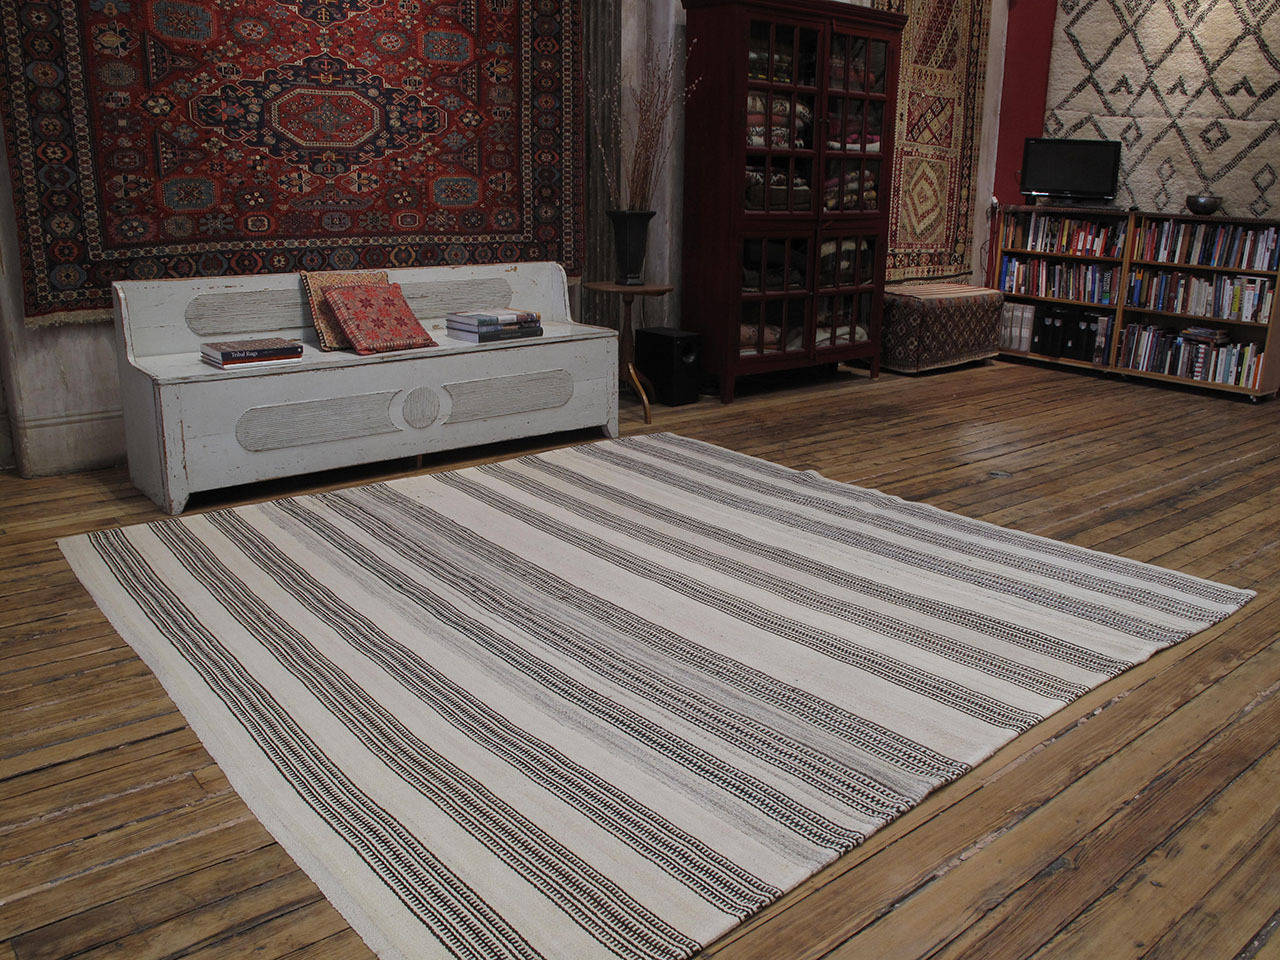 A large and sturdy tribal flat-weave from Southeastern Turkey, woven entirely with wool and goat hair in natural tones, originally used as a utilitarian floor cover in the weaver's household. The quality of the weave and the materials are amazing,